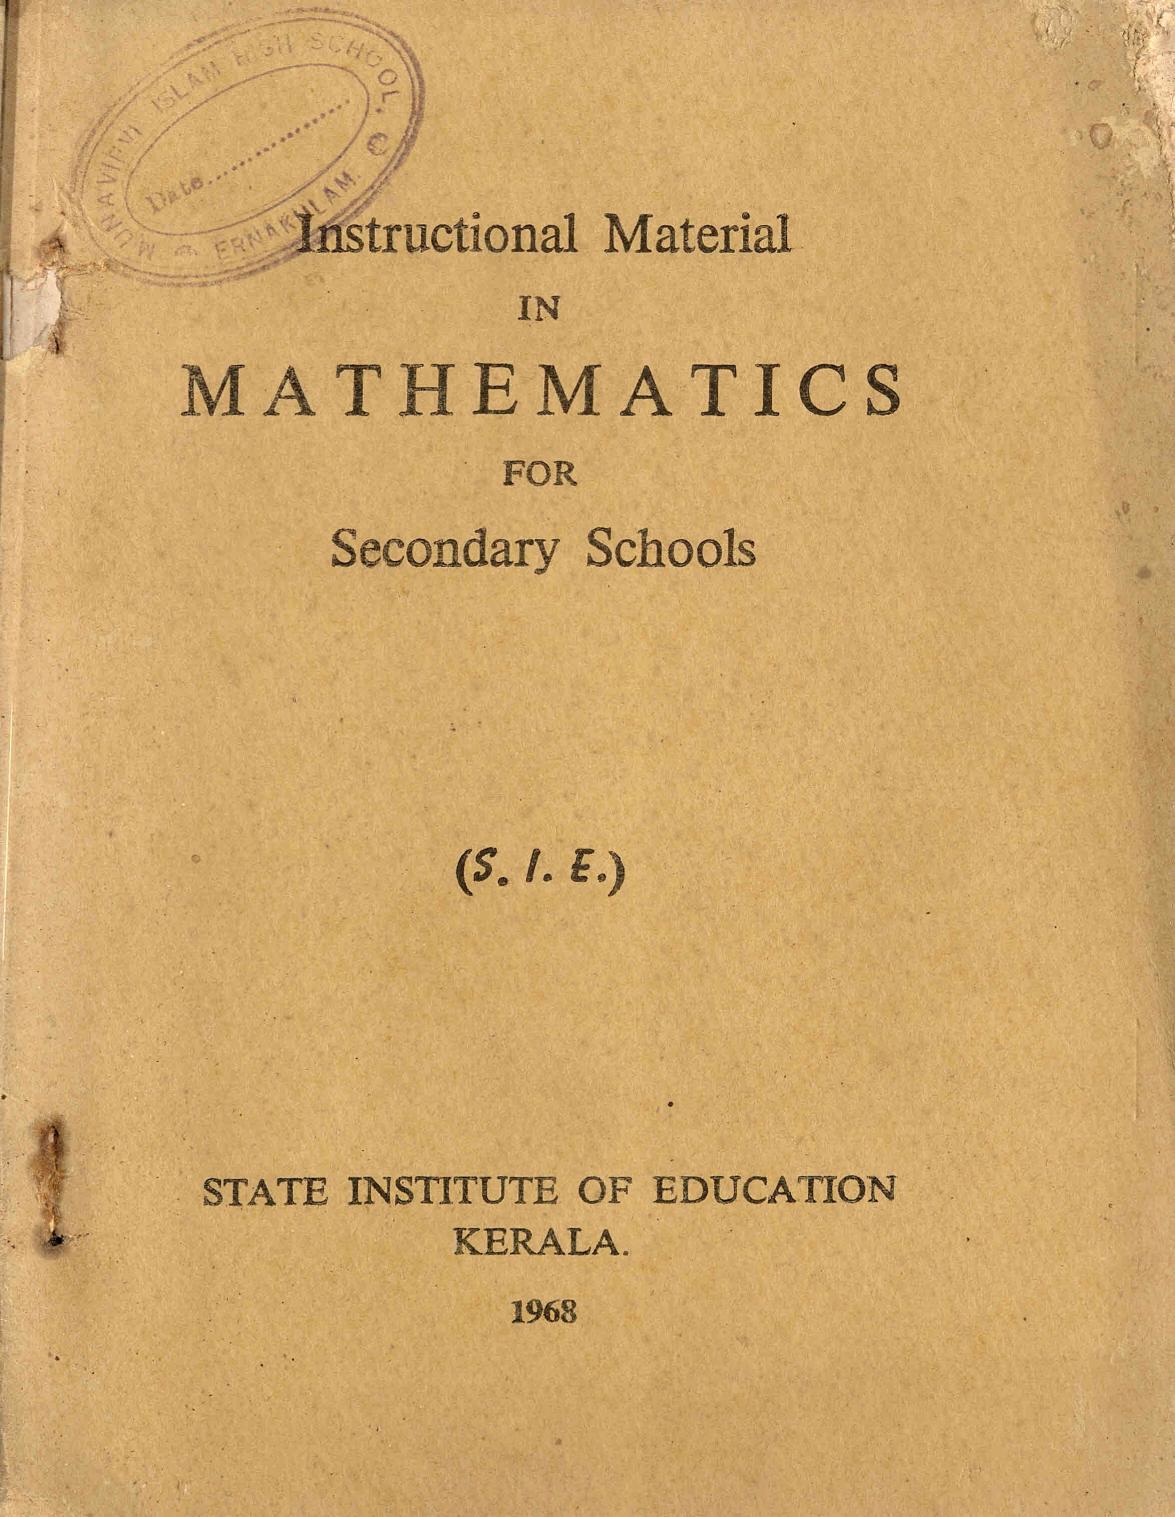 1968 - Instructional Material in Mathematics for Secondary Schools